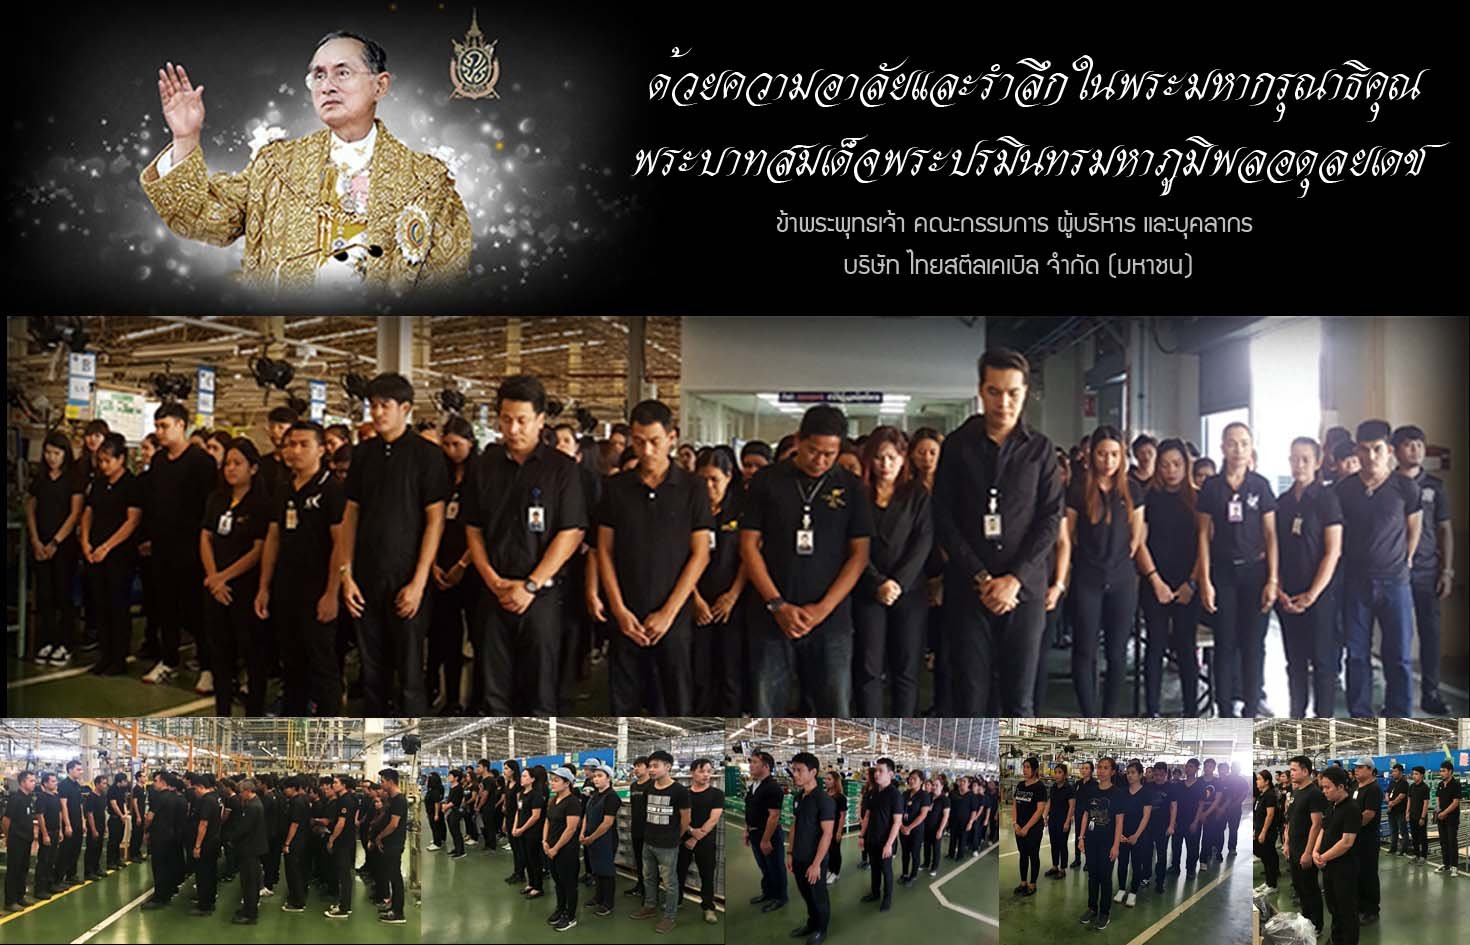 In remembrance of His Majesty King Bhumibol Adulyadej.